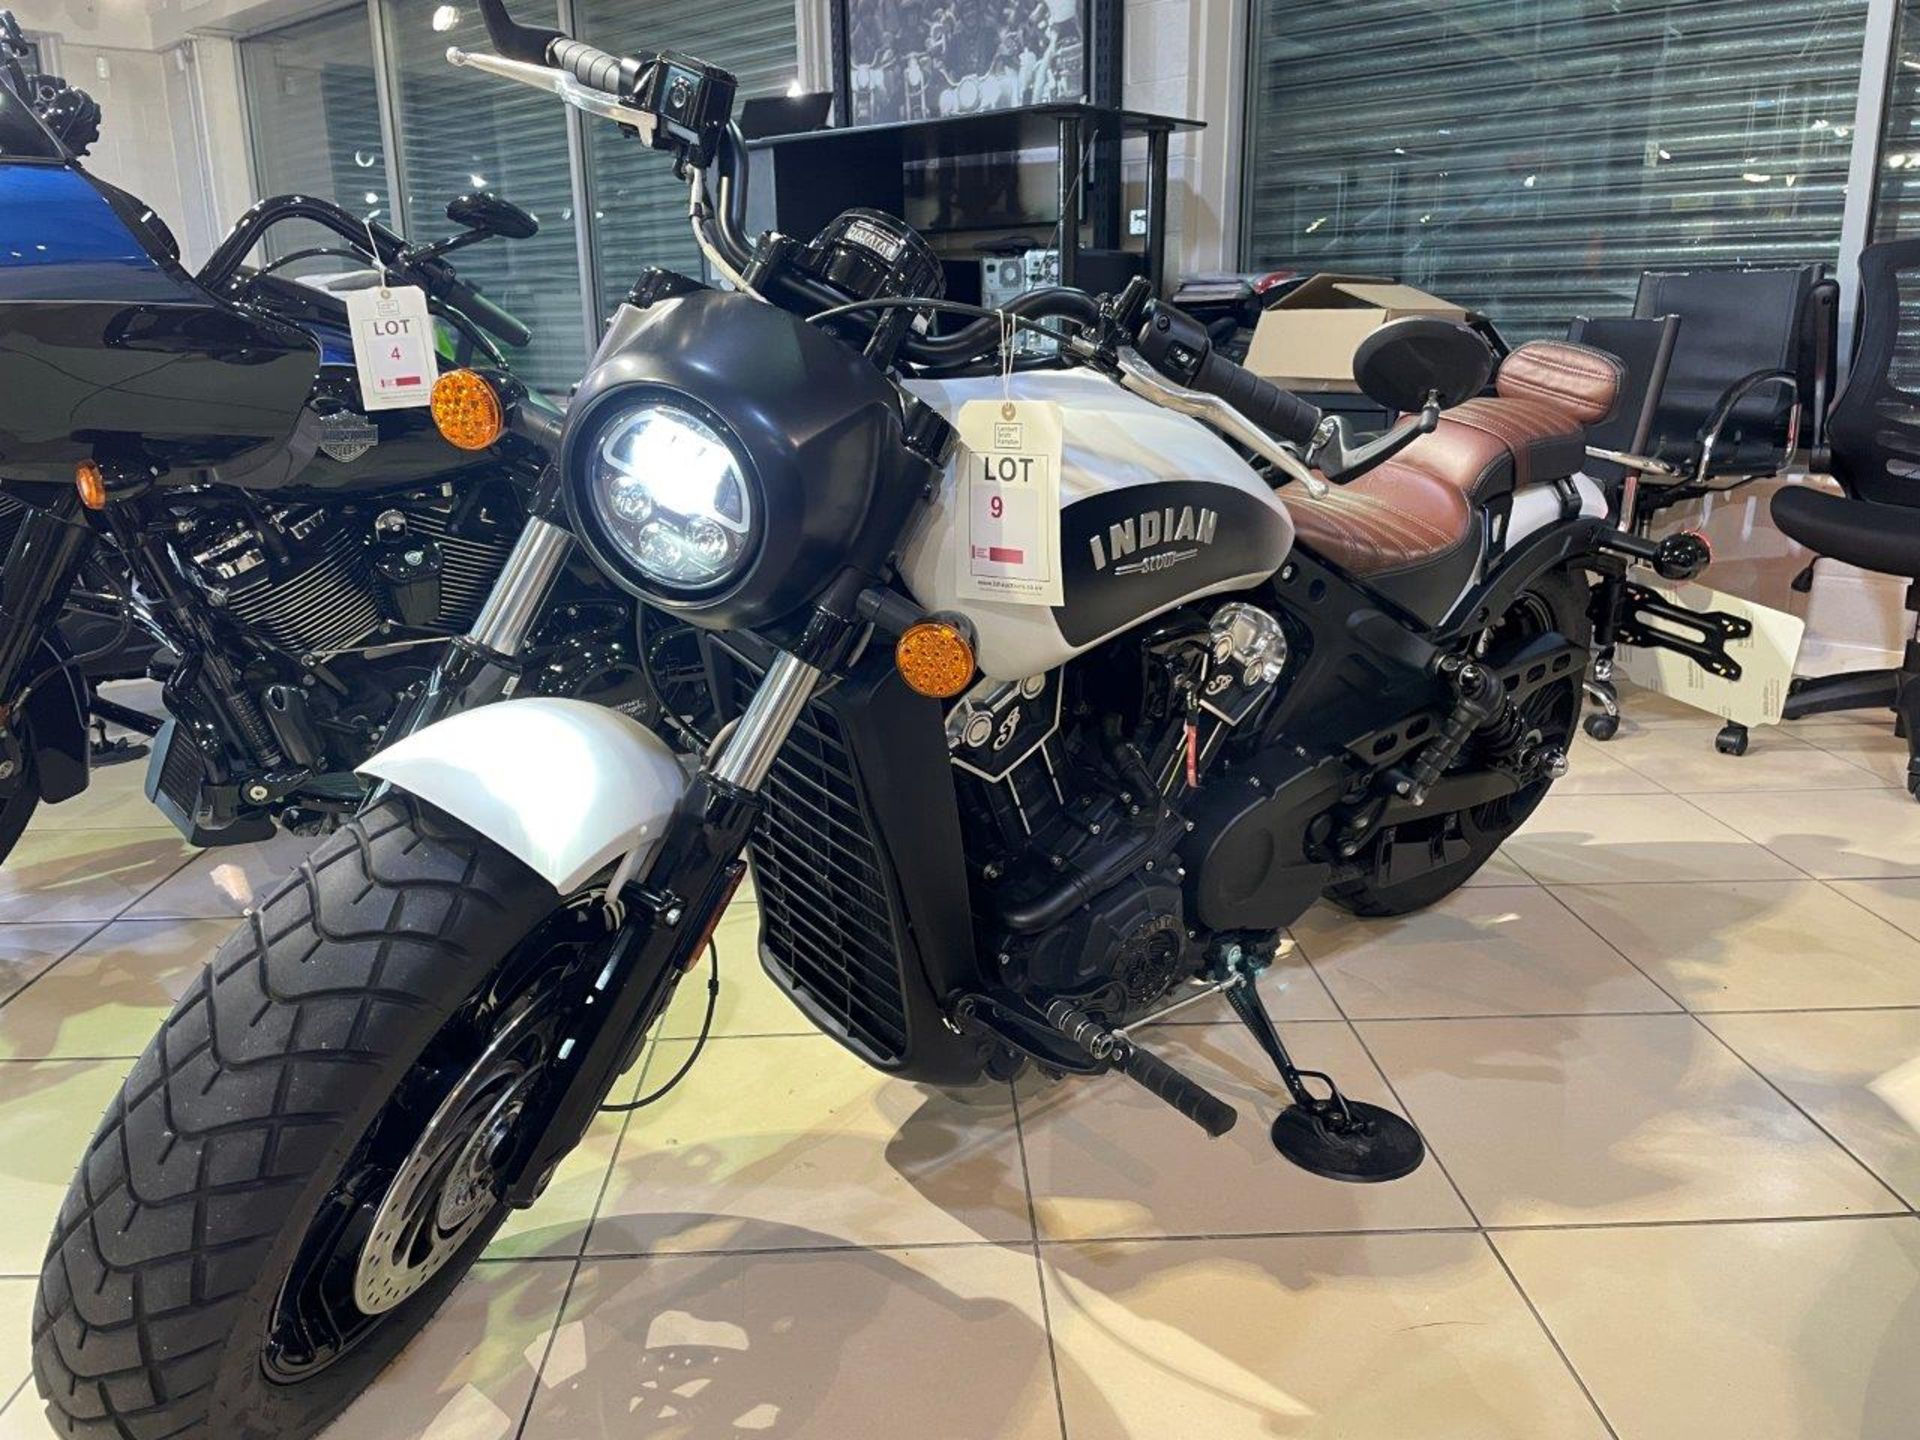 Indian Motorcycles Scout Bobber Motorbike (May 2019) - Image 8 of 18